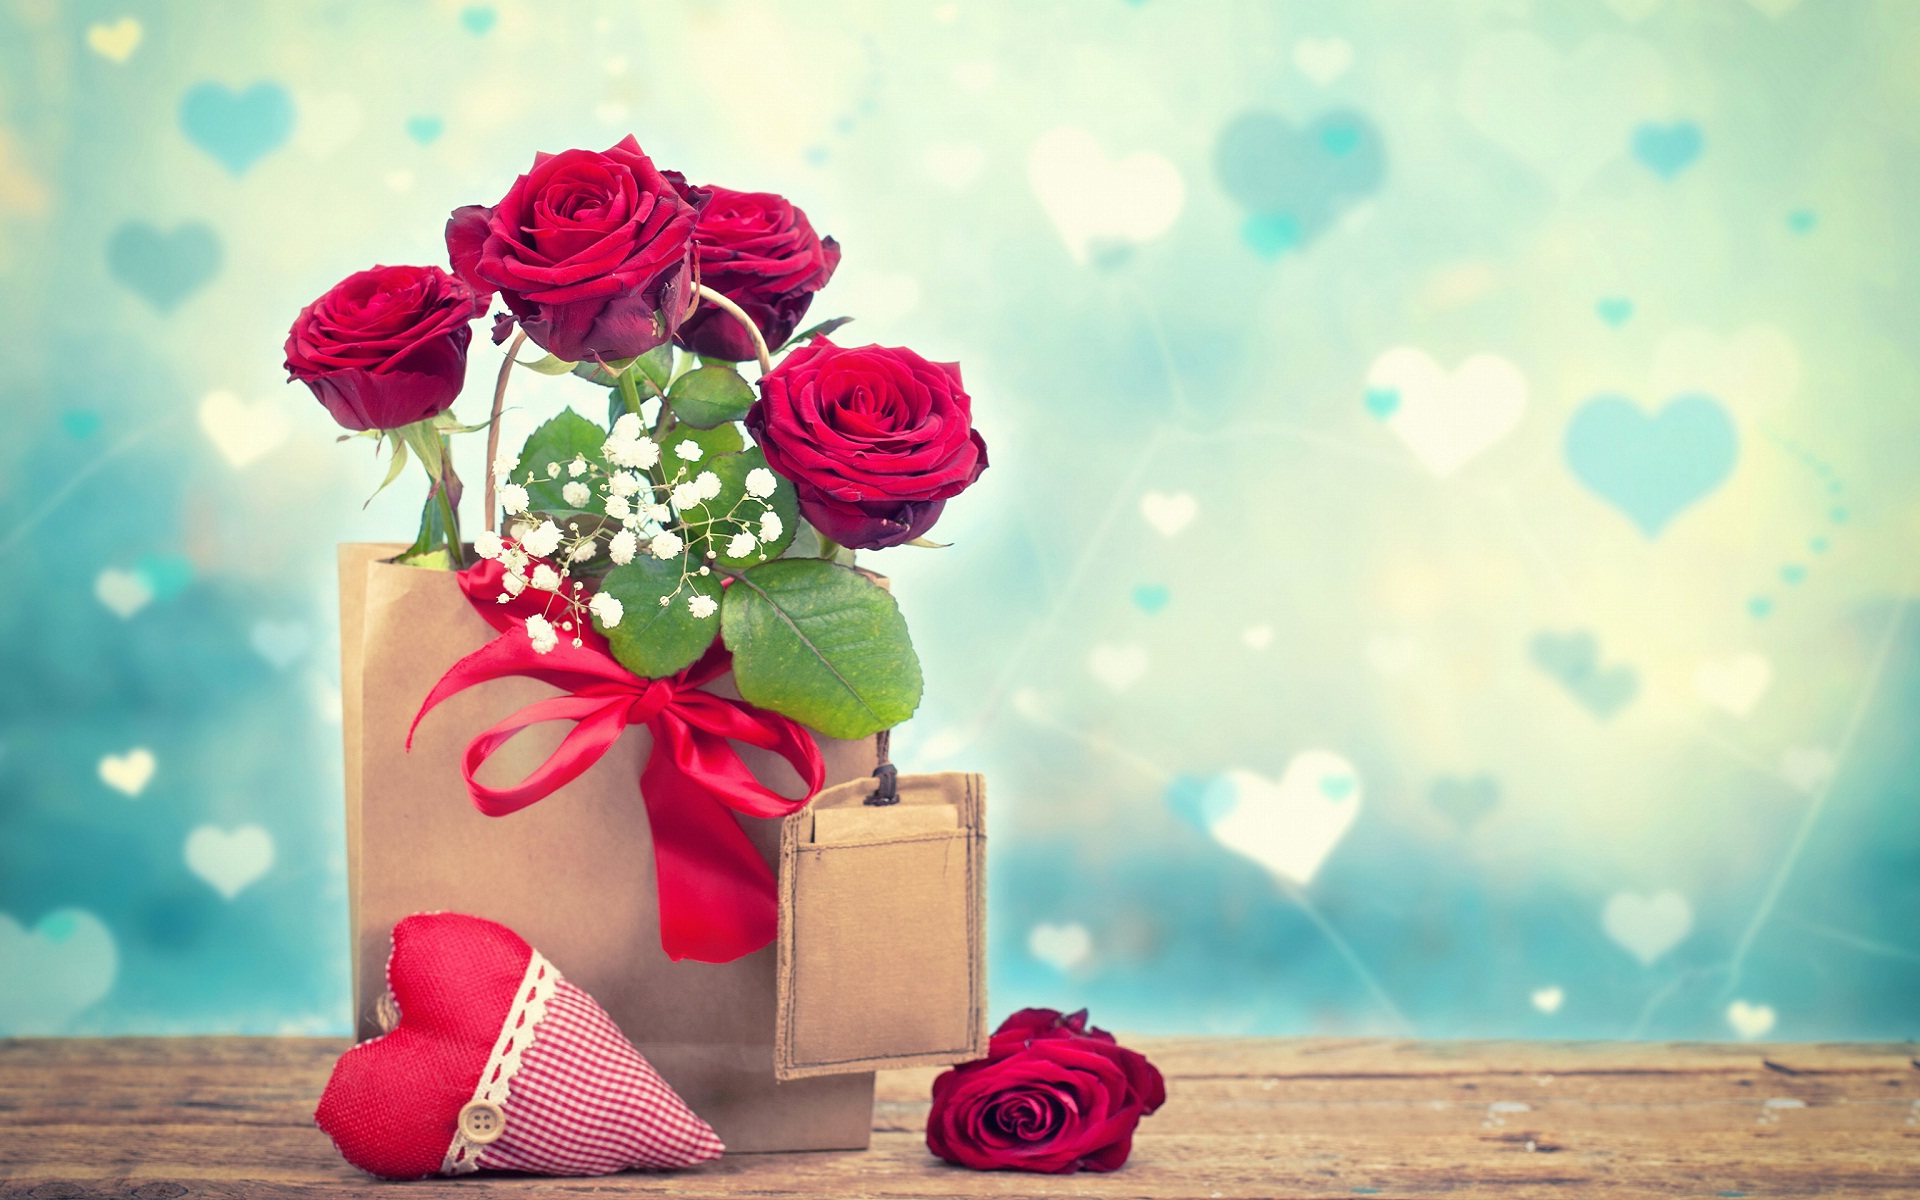 Flower For A Special Person - HD Wallpaper 